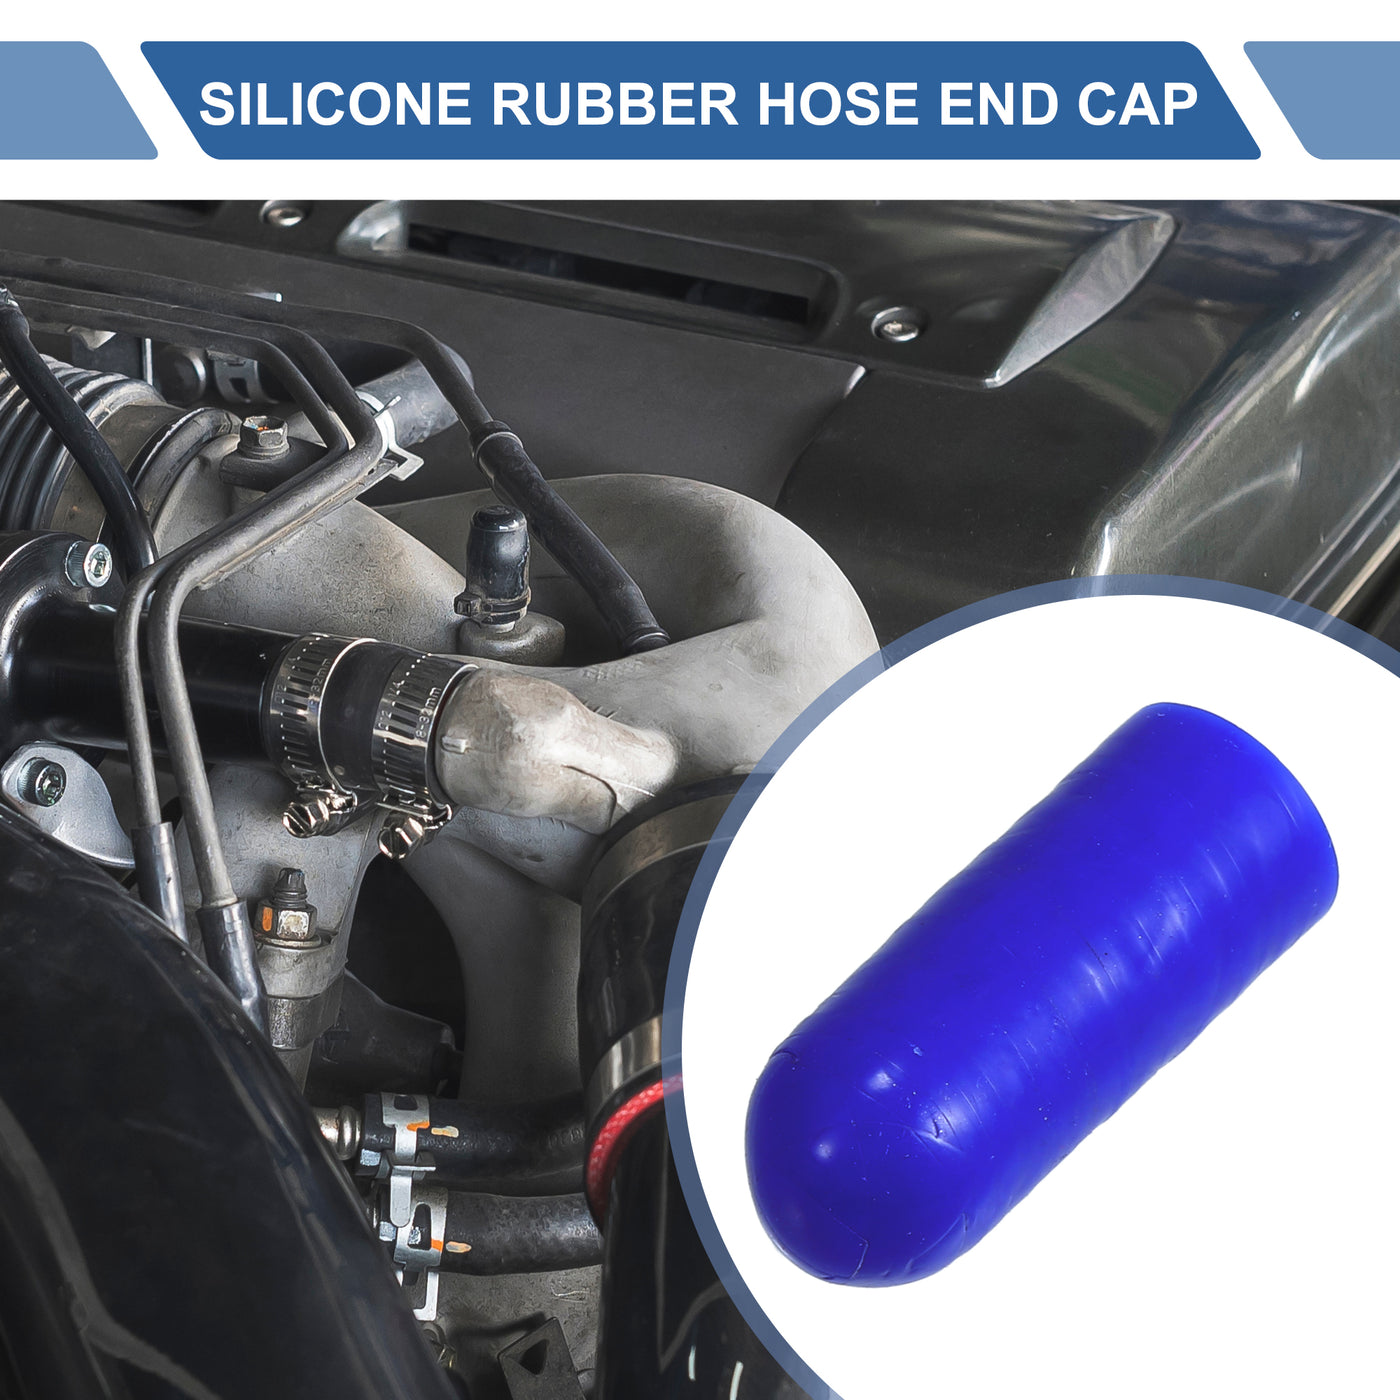 X AUTOHAUX 1 Set 30mm Length 6mm/0.24" ID Blue Car Silicone Rubber Hose End Cap with Clamps Silicone Reinforced Blanking Cap for Bypass Tube Universal